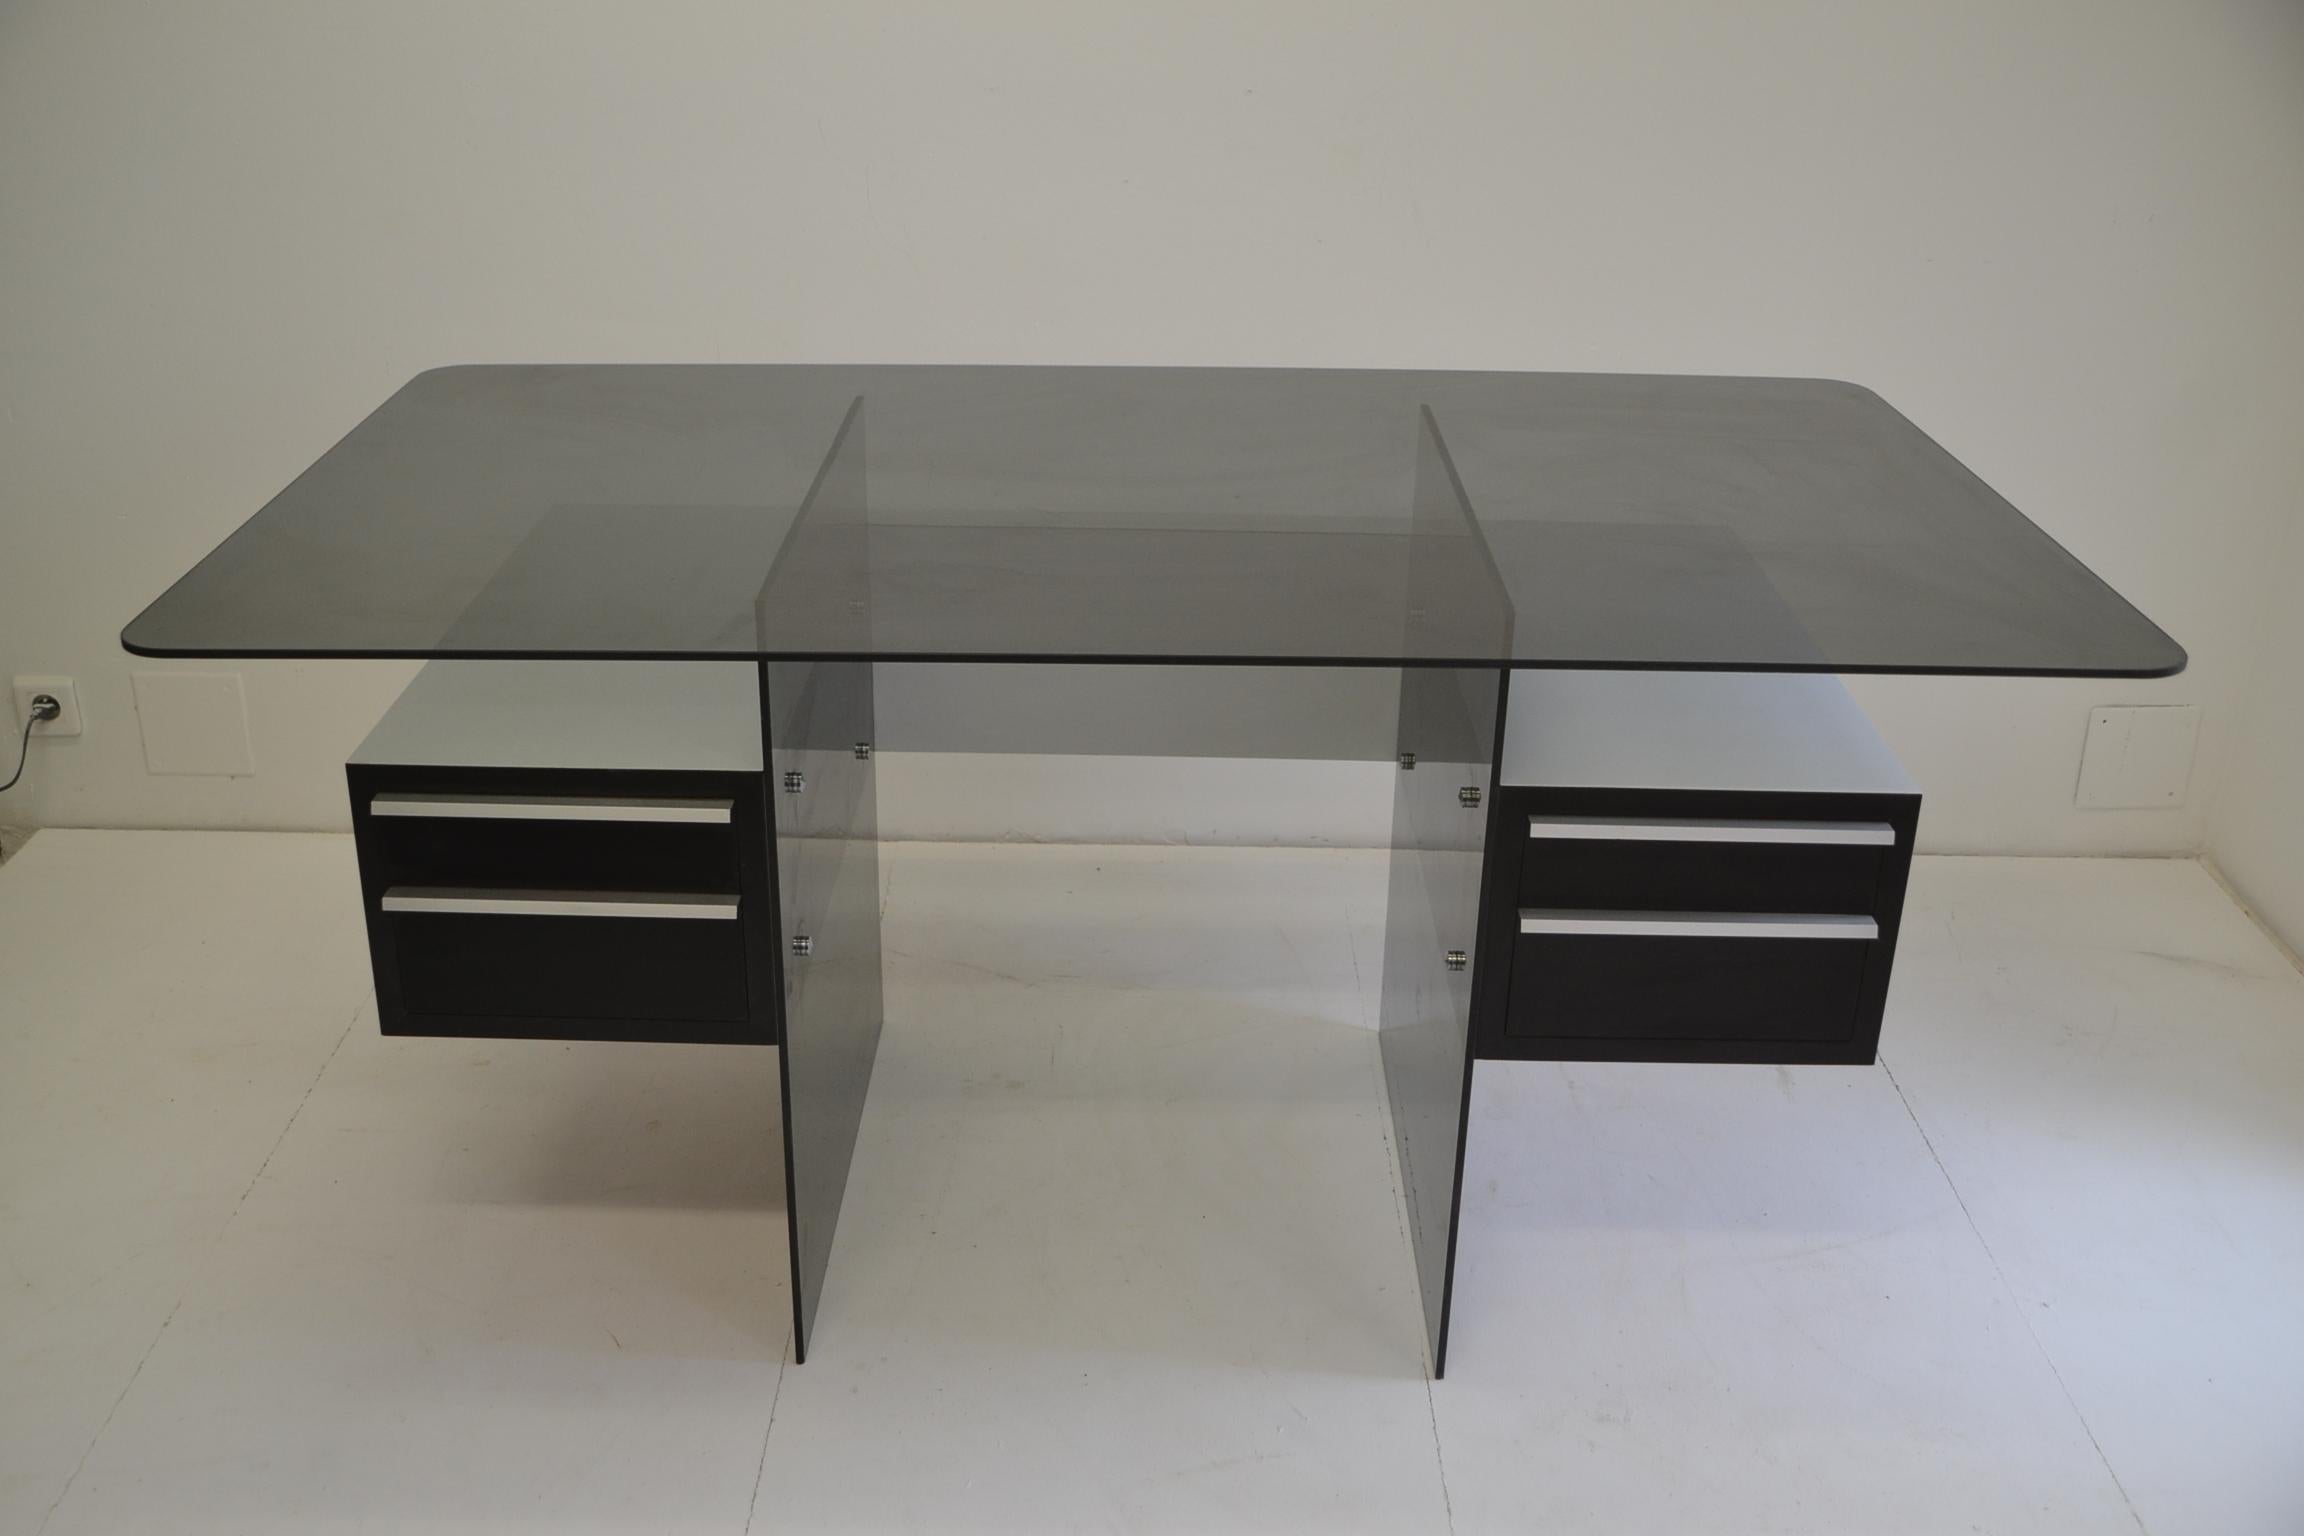 Xavier MARBEAU Office made of glass, steel and wood from the 1970s. Frame in glass and frame with 2 wooden storage boxes on each side. Spacer in glass and top plate in smoked glass. The storage boxes are composed of 2 drawers in black oak veneer. In